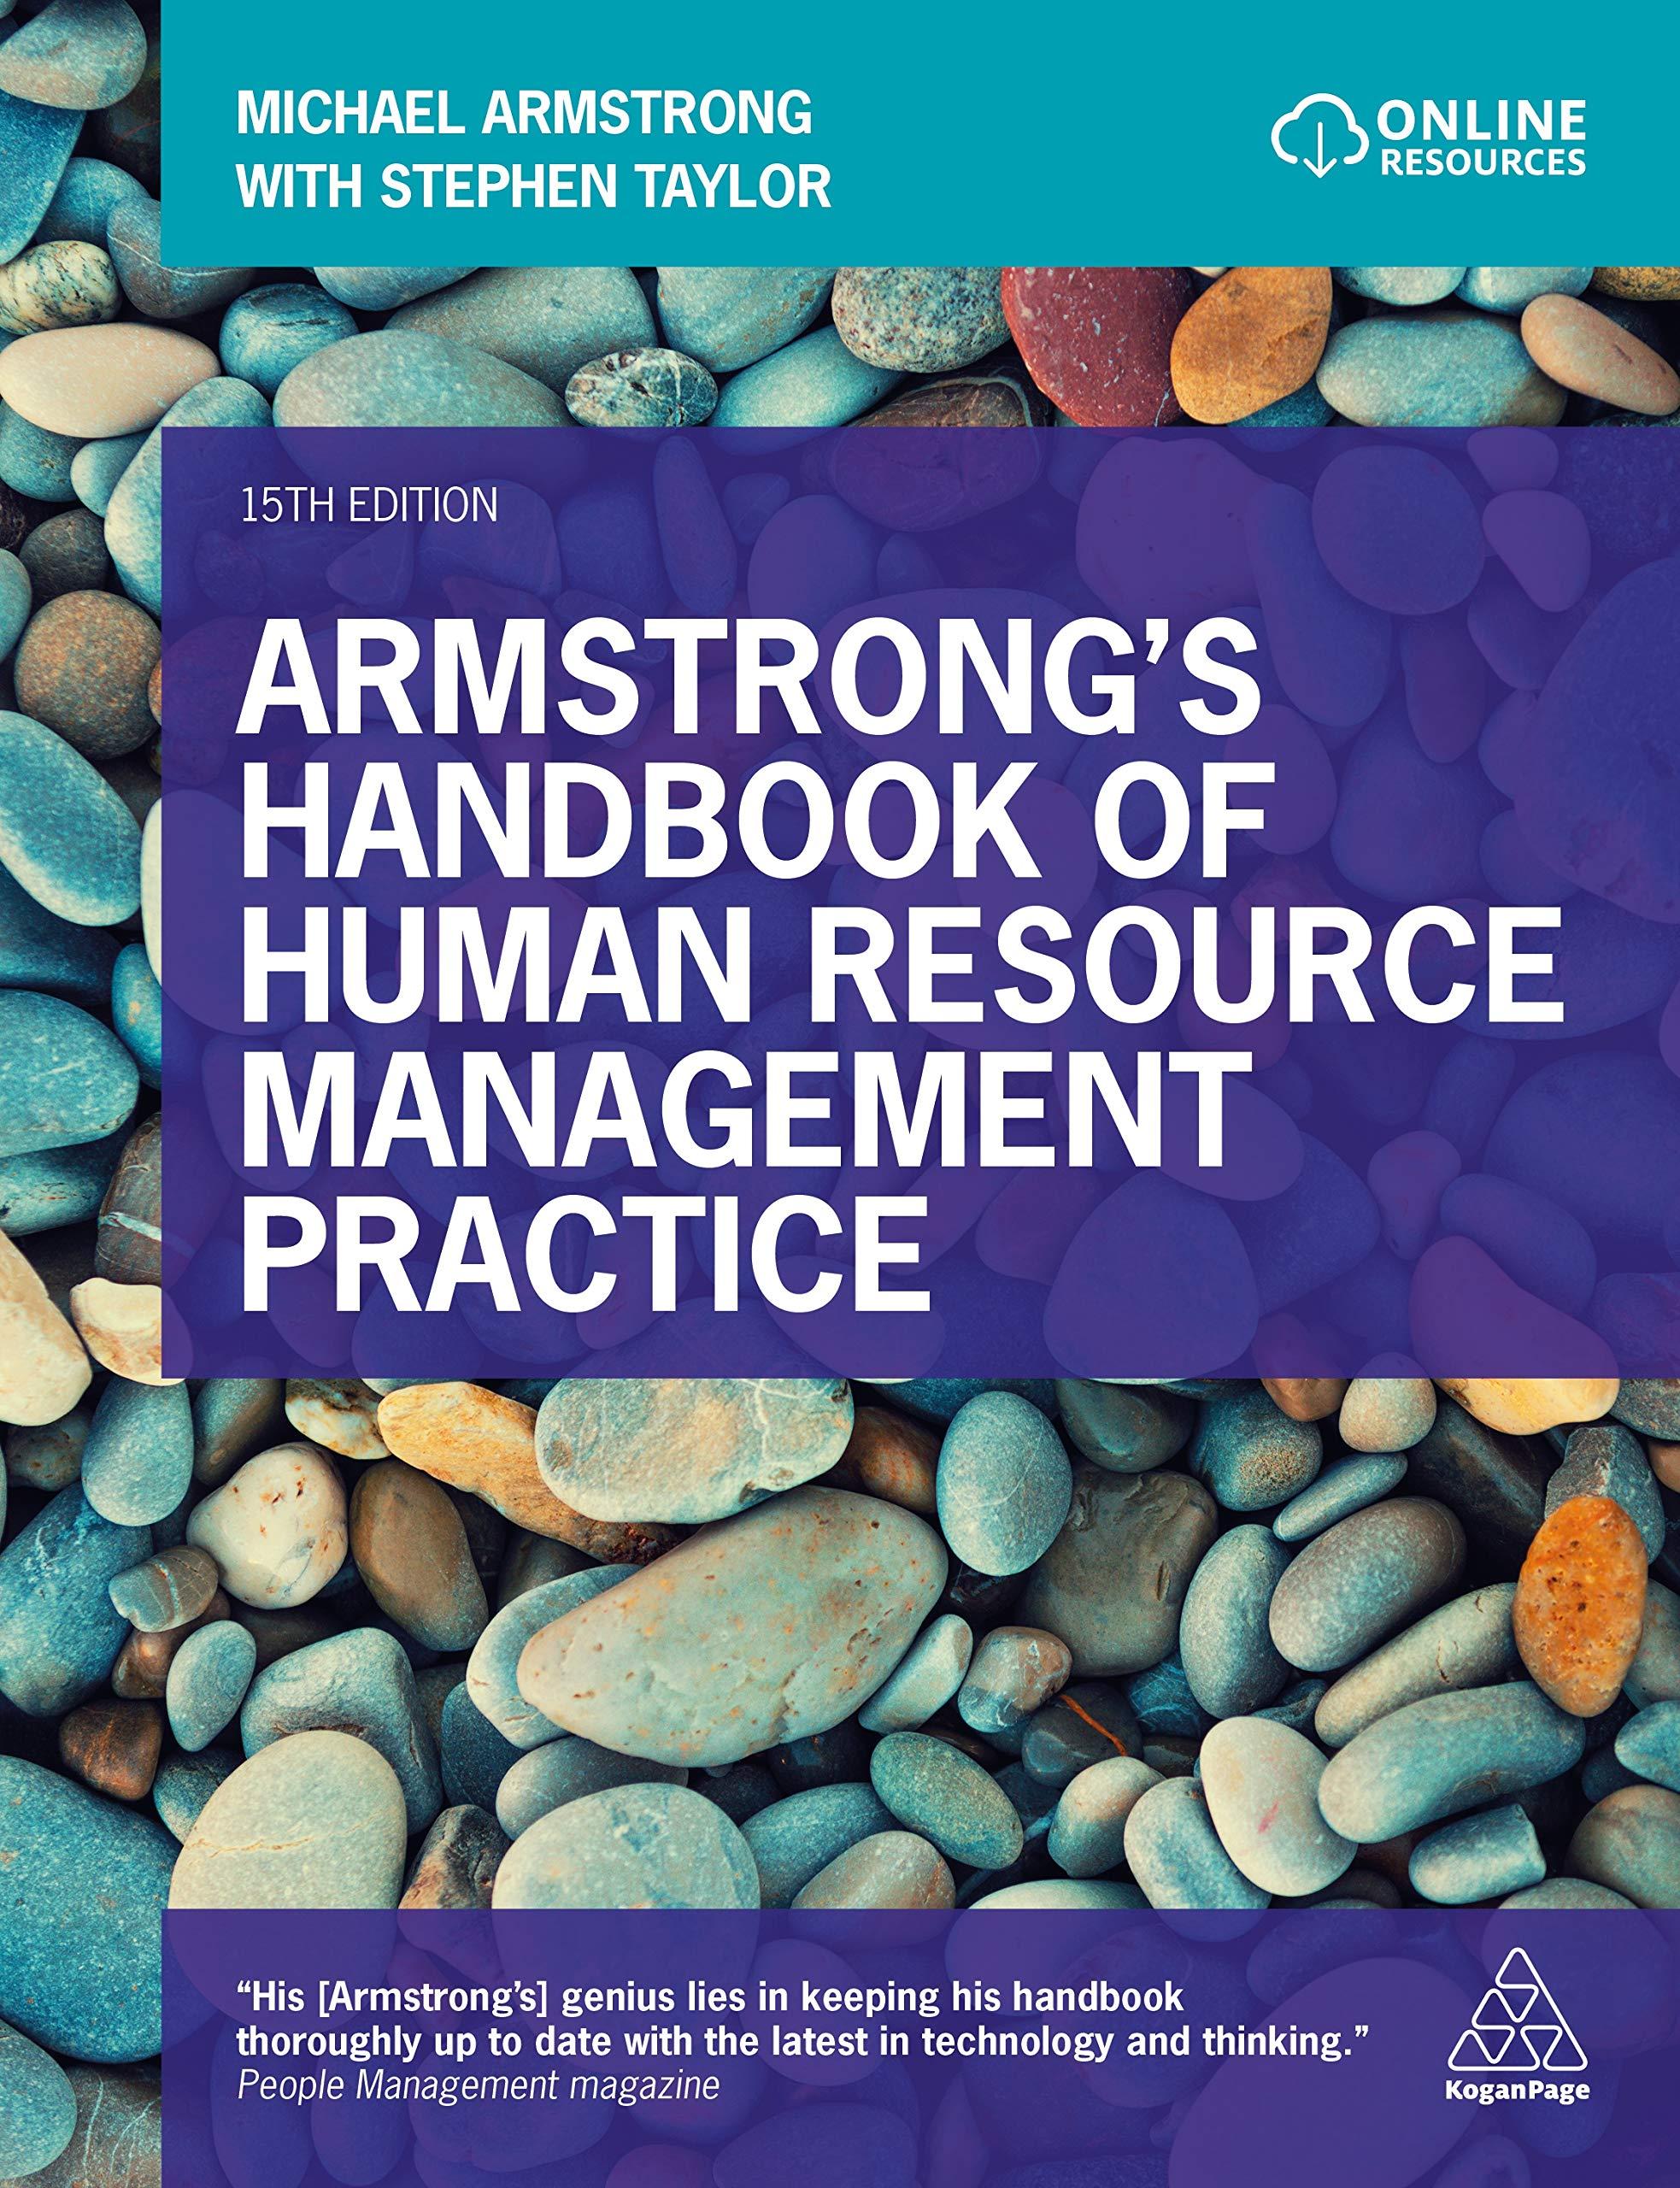 armstrongs handbook of human resource management practice 15th edition michael armstrong, stephen taylor